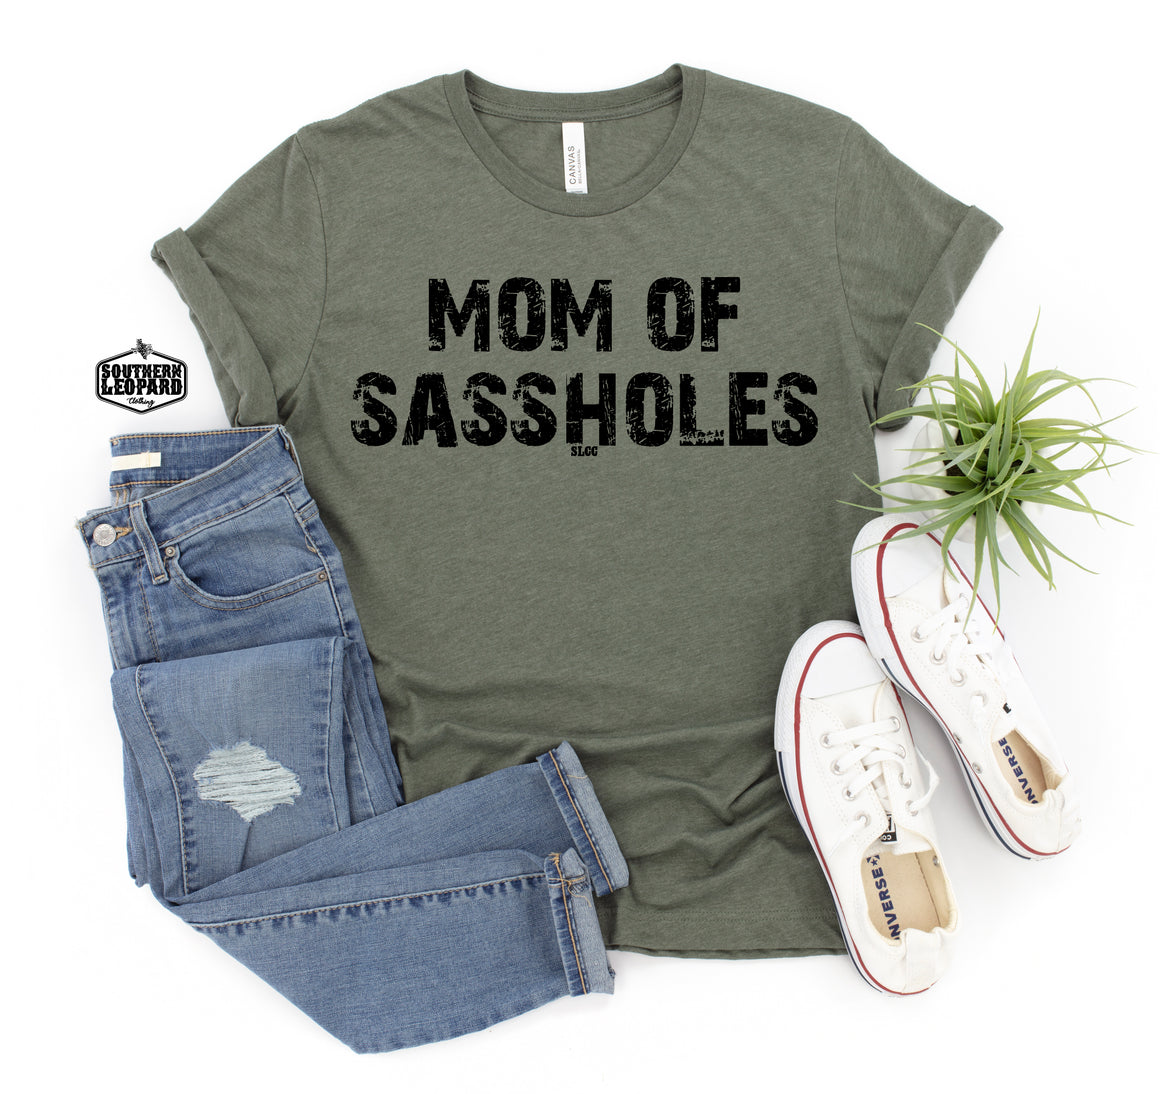 Mom of sassholes – Southern Leopard Clothing